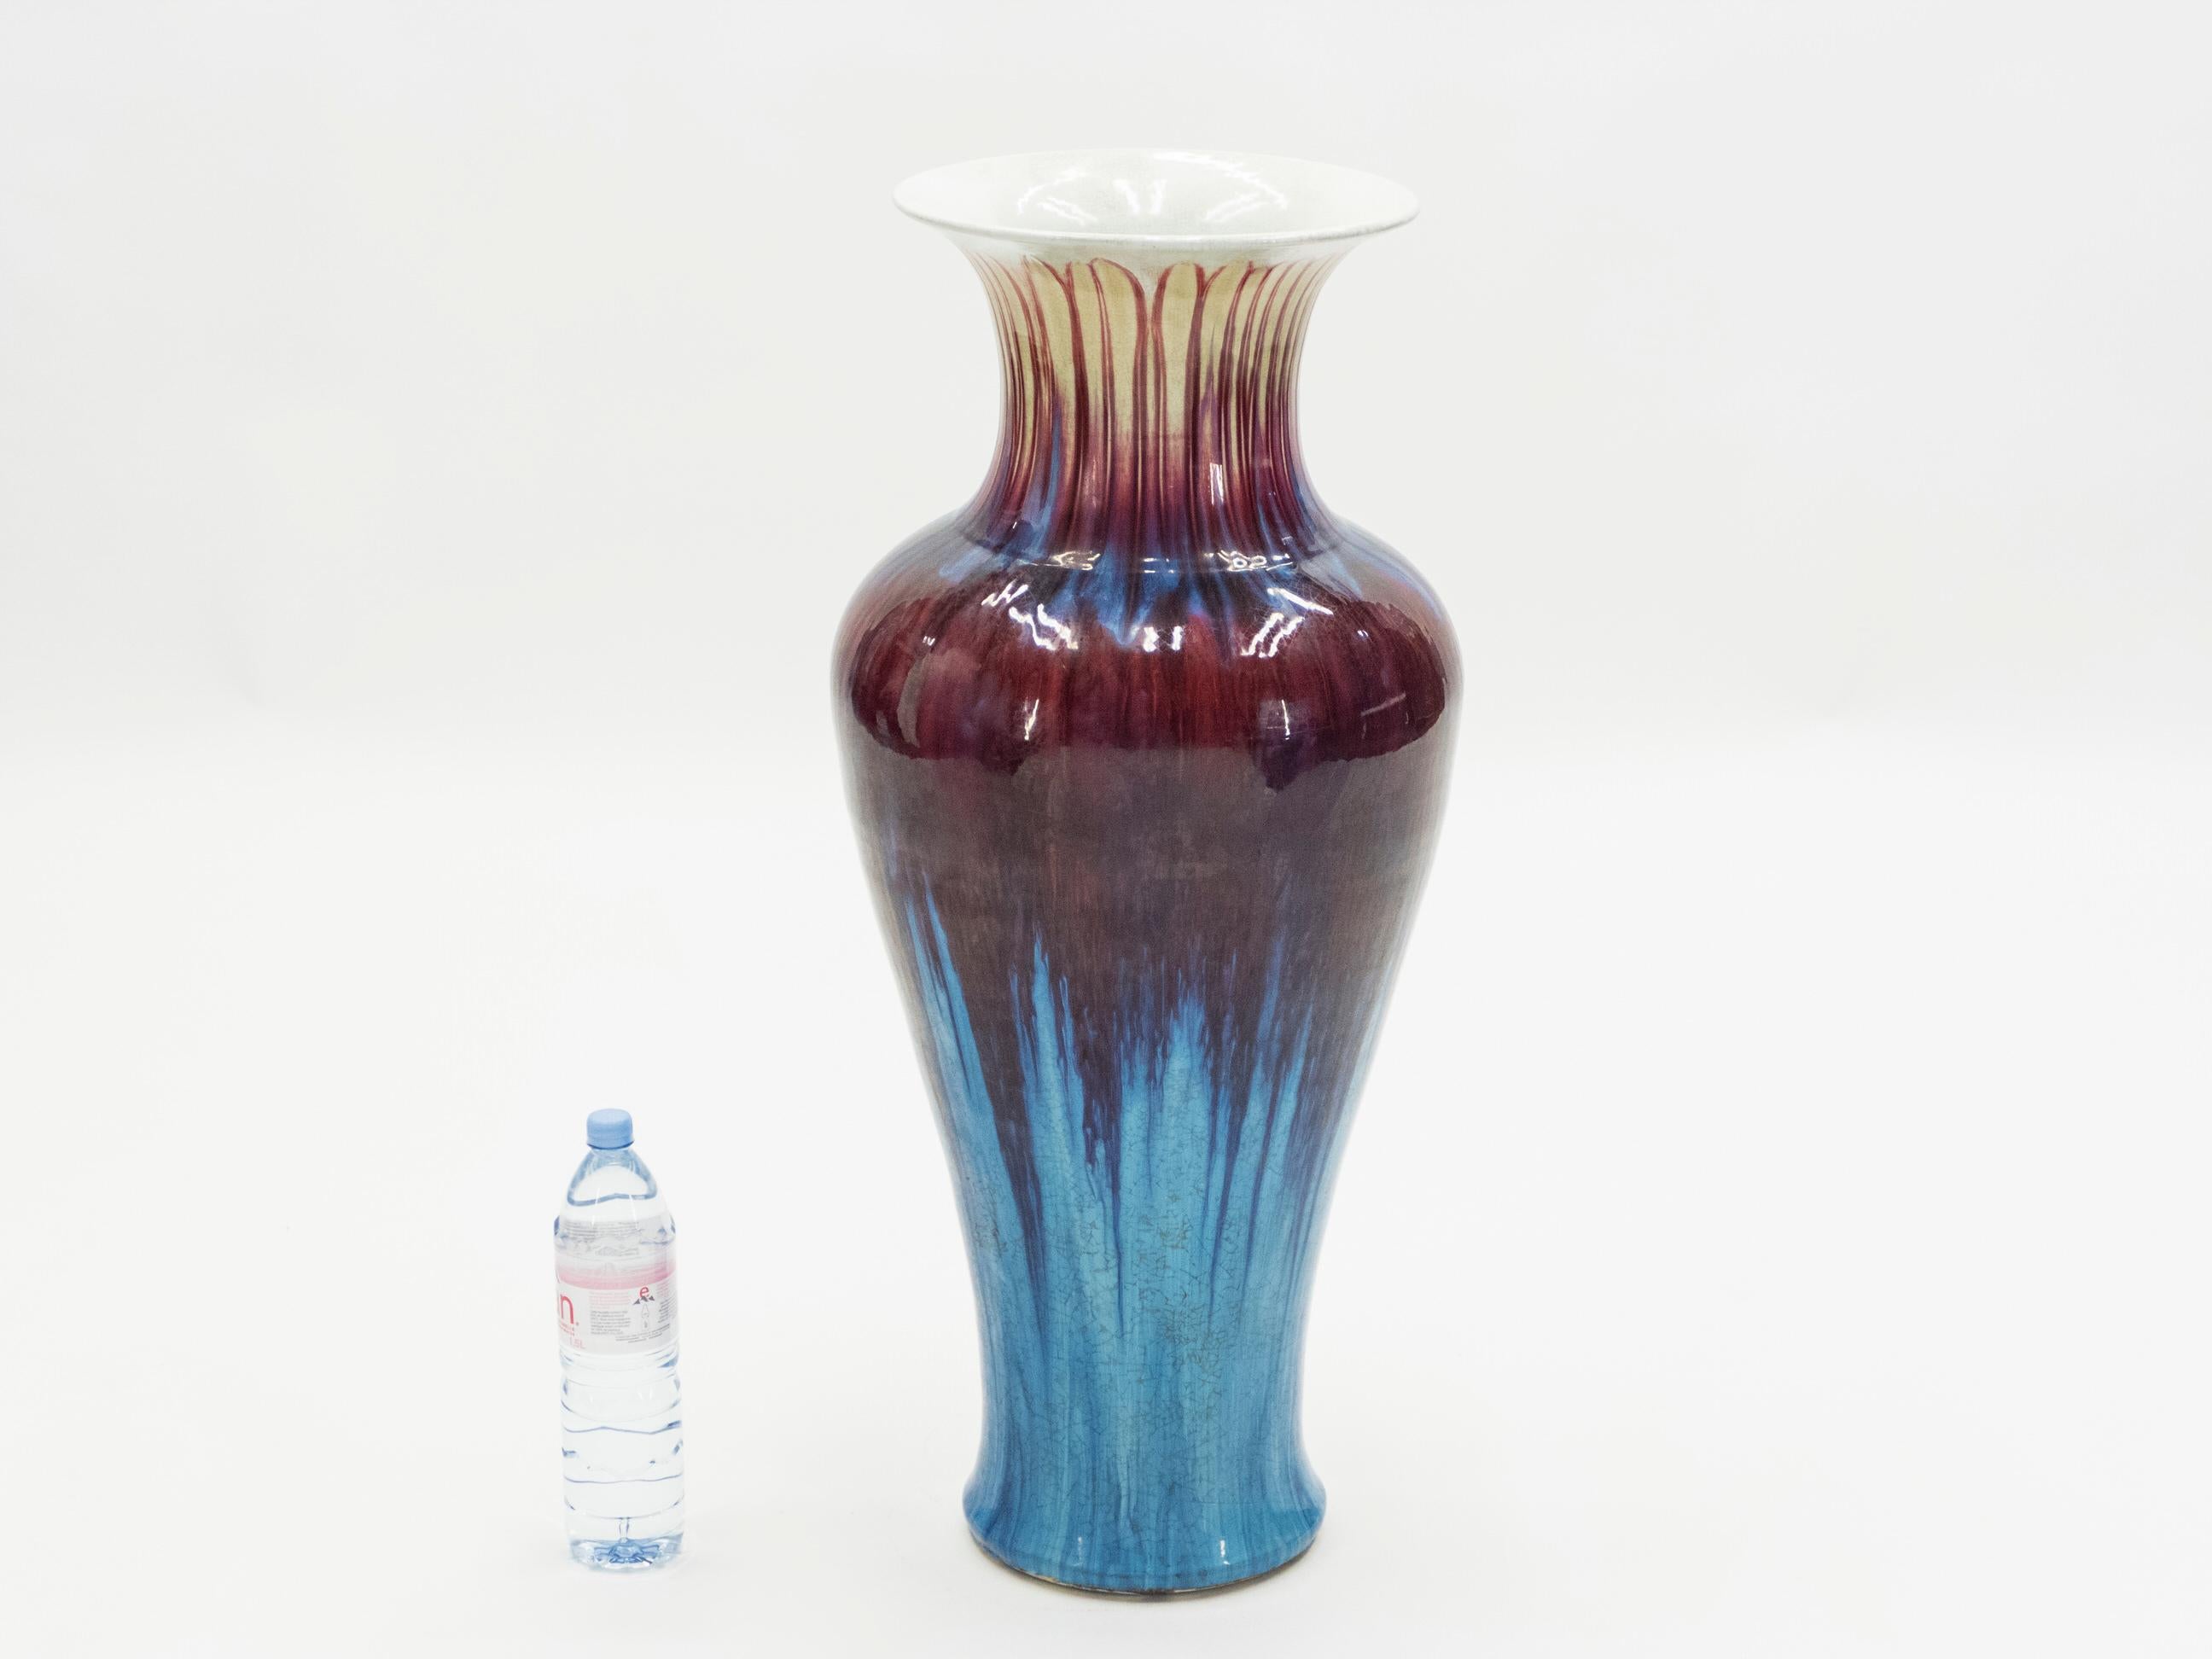 This berry-colored ceramic vase feels very much of the 1960s. The deep, raspberry red and candy blue colors are strewn around the vase like tie-dye the red blooms across the widest part of the vase and trails down the bottom over the blue